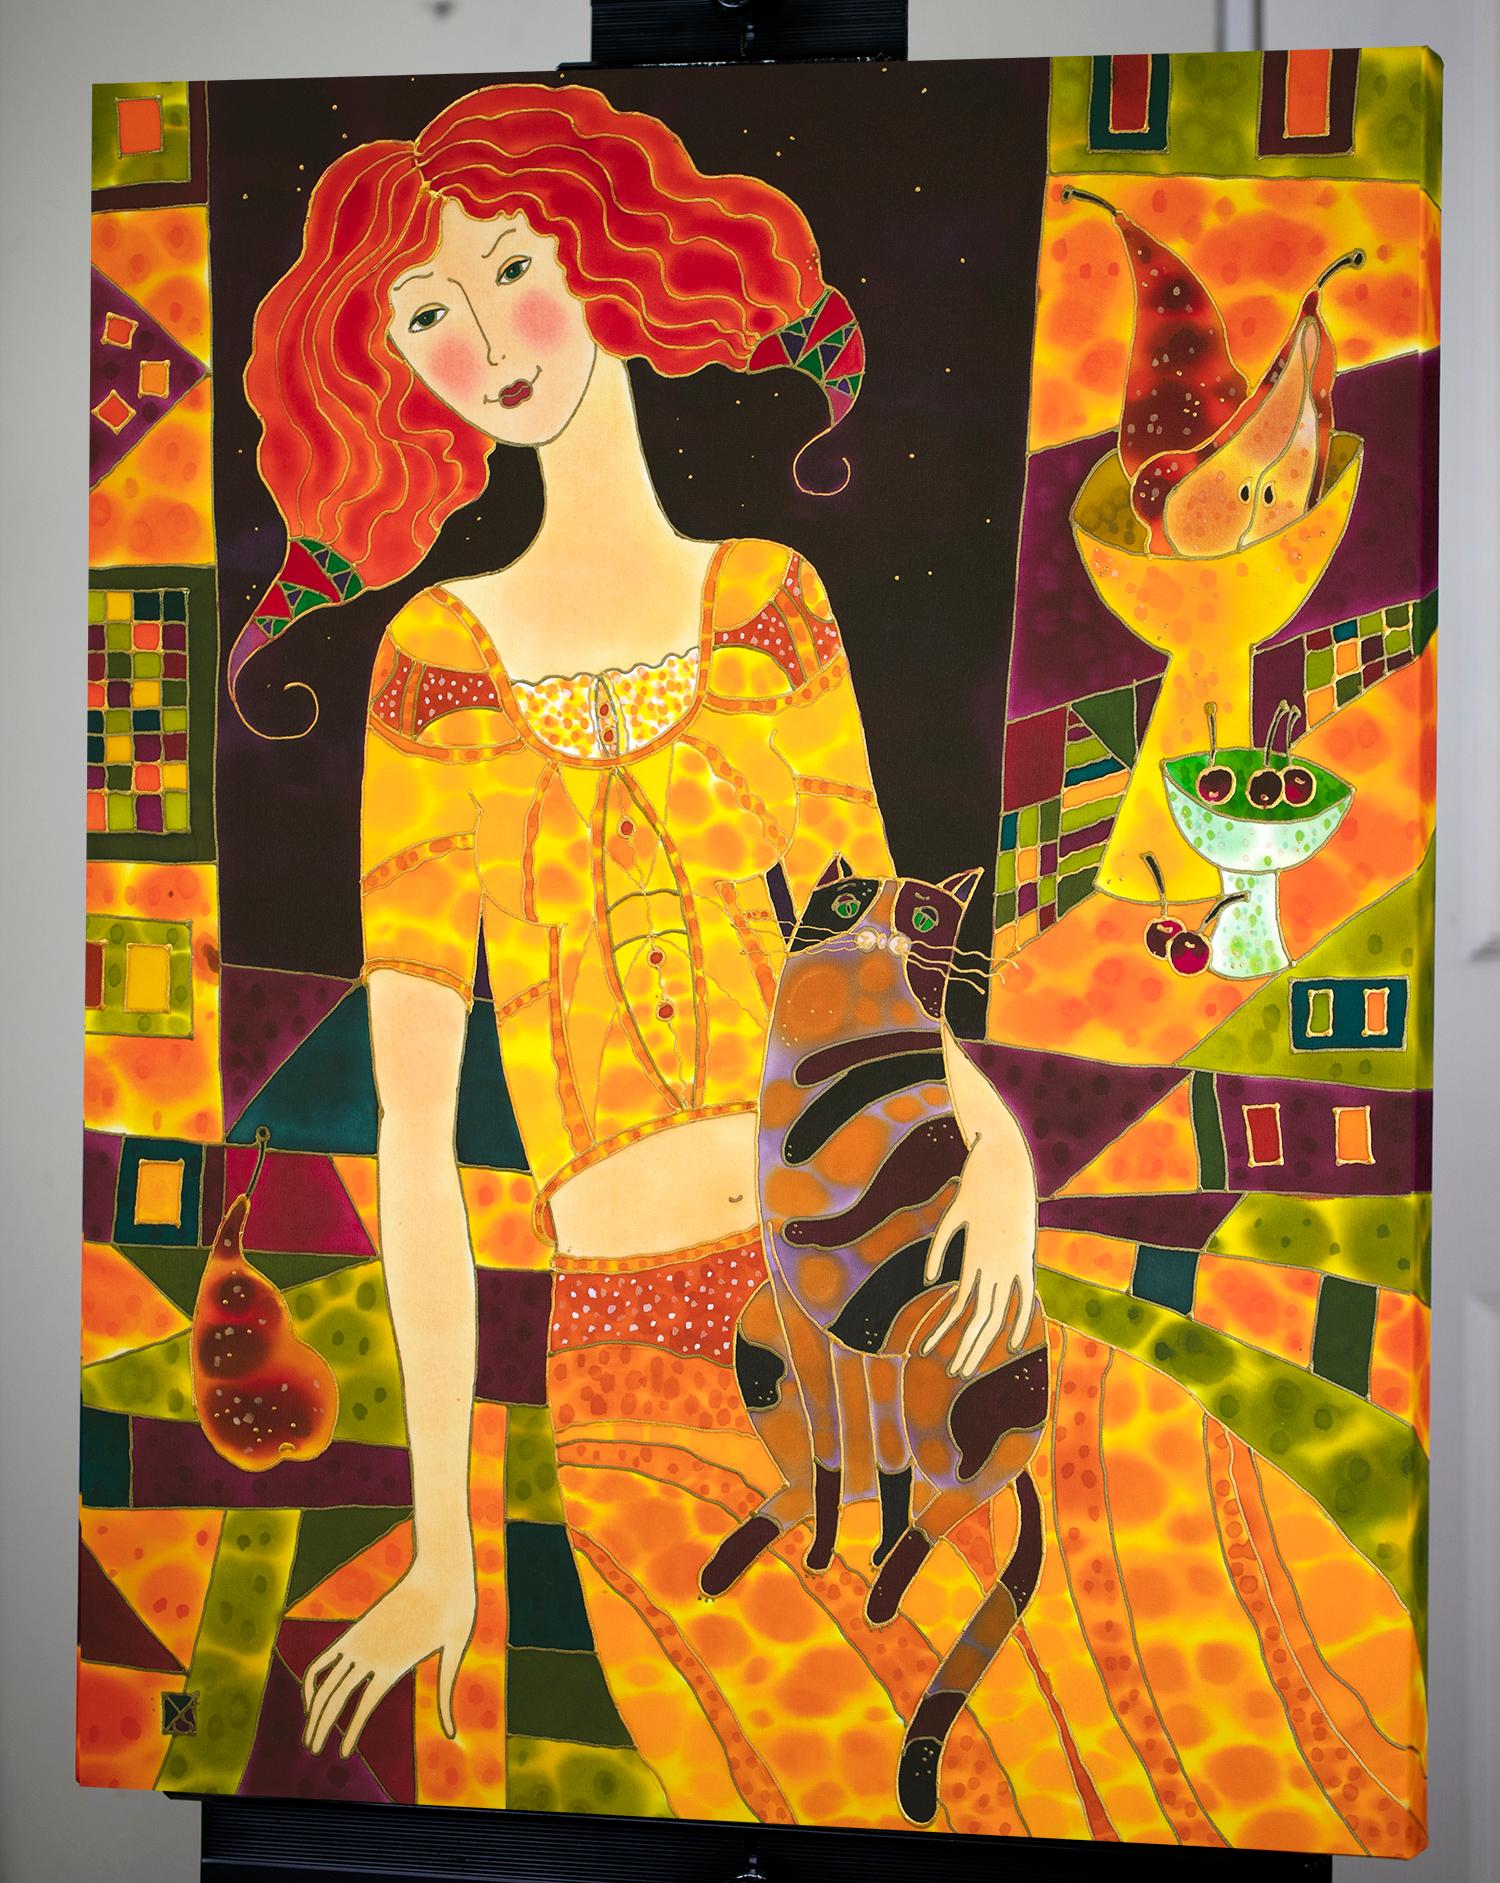 <p>Artist Comments<br>As a part of artist Yelena Sidorova's Figurative series, this painting celebrates the connection between a girl and her feline friend. Bright bursts of colors echo their charming bond on a cheerful night. The creation process